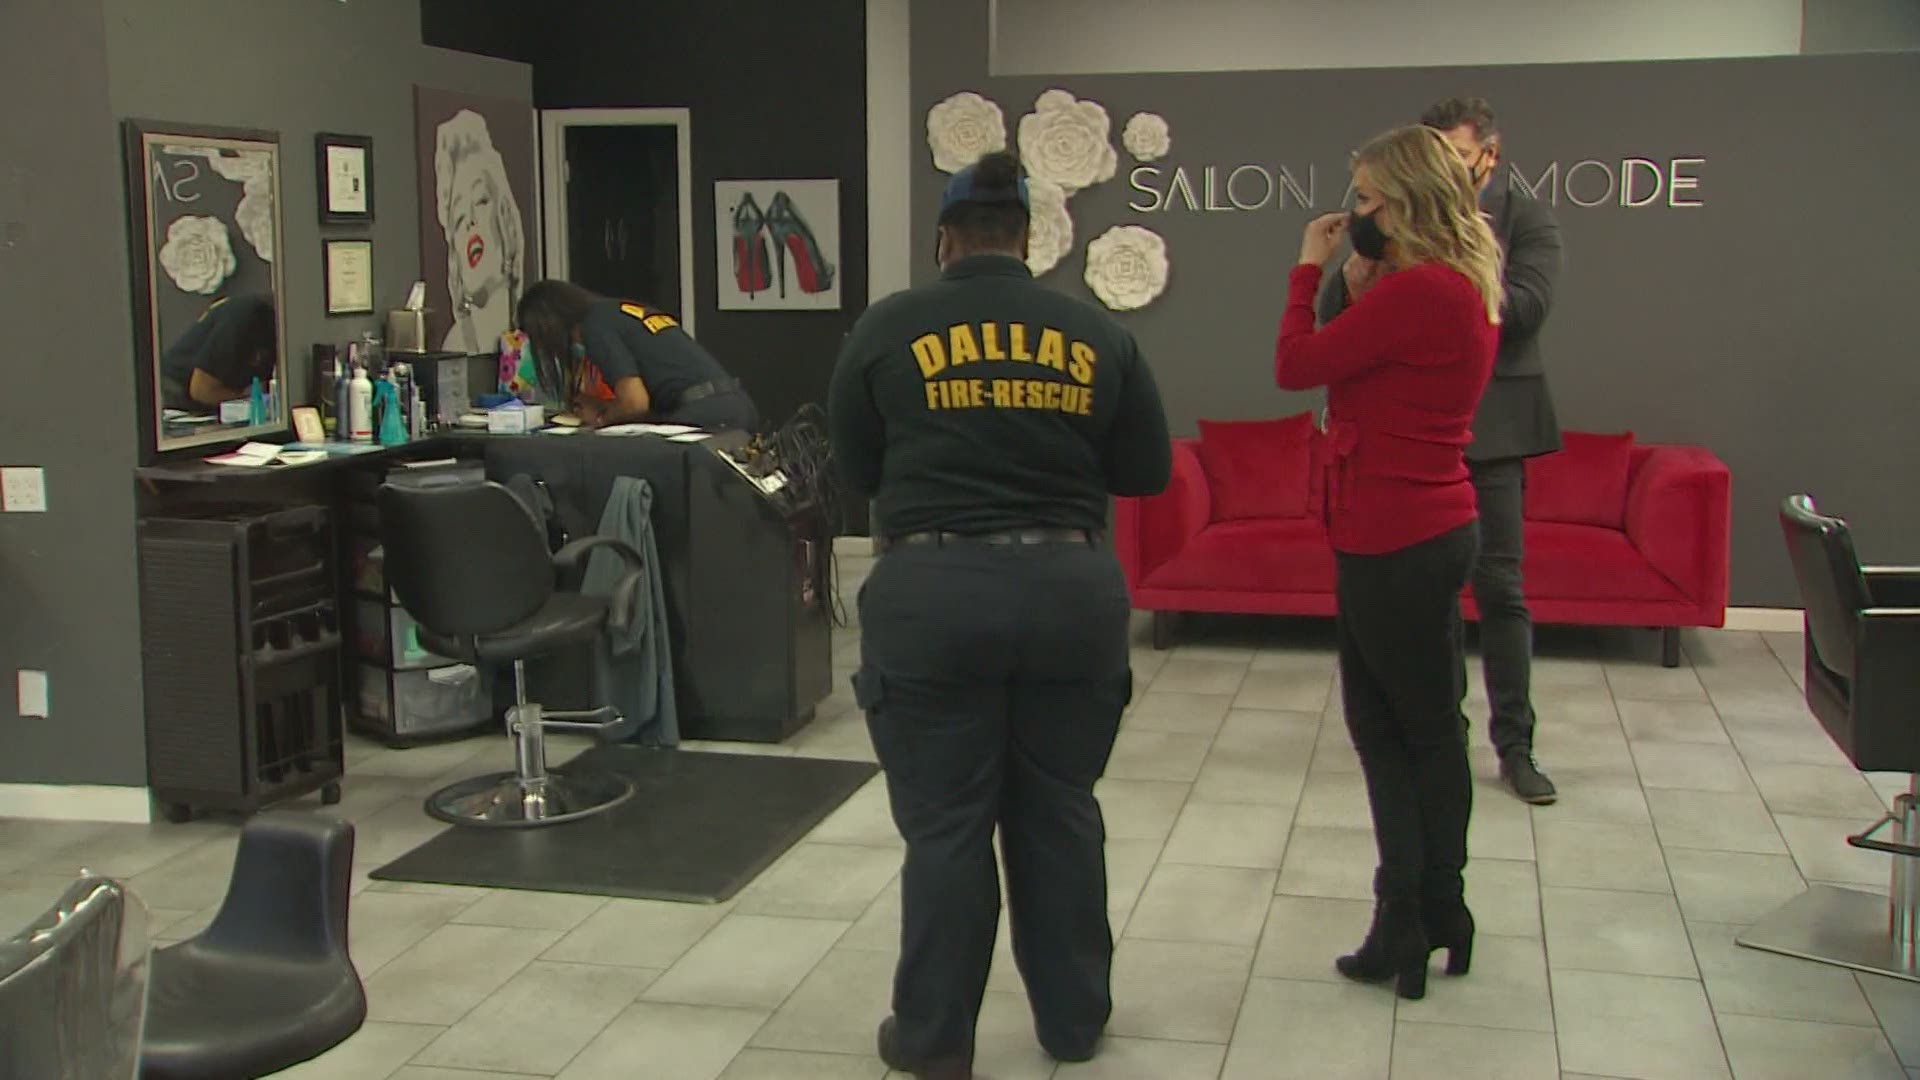 Dallas salon owner ordered to close after reopening against stay-at-home  orders 